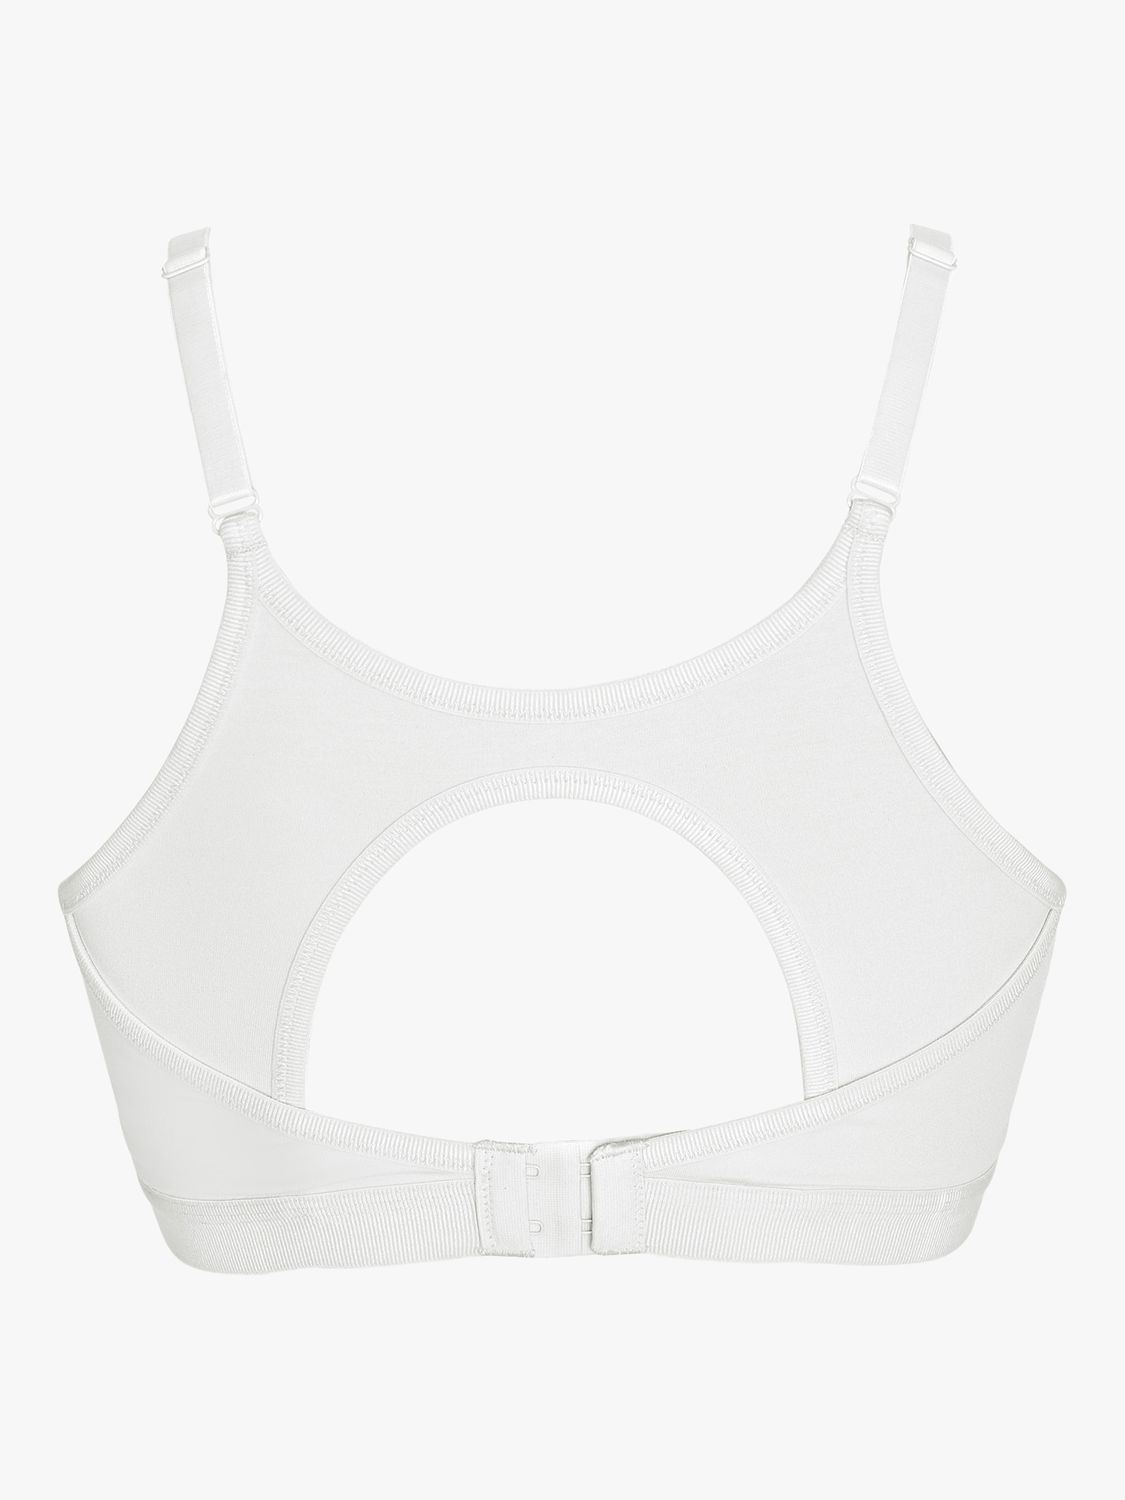 Buy Royce Lola Crop Top Non-Wired Bra, Pack of 2, Peach/White Online at johnlewis.com